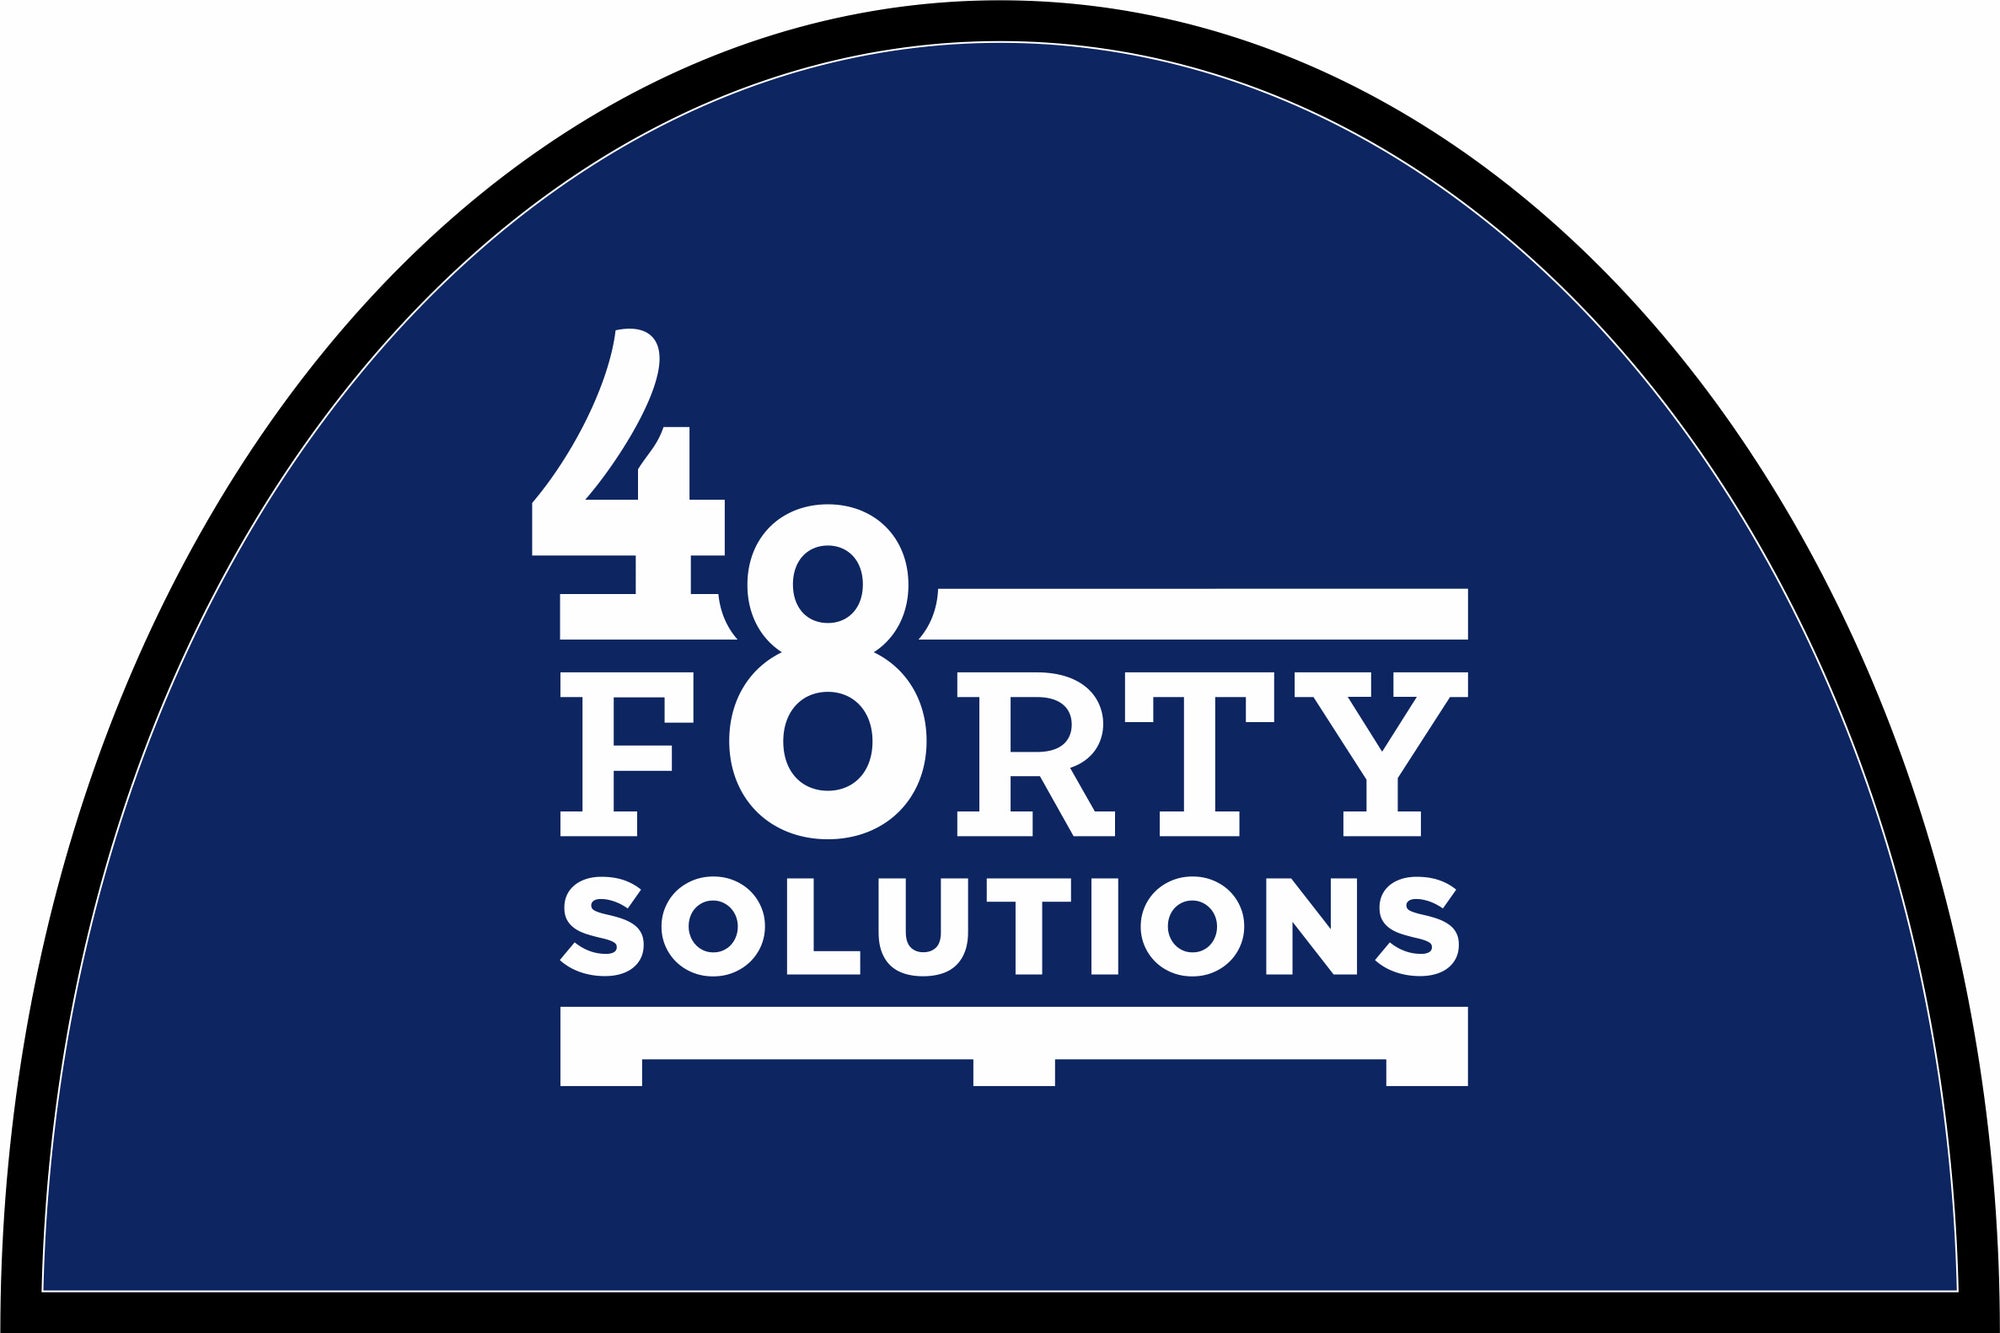 48forty Solutions West Point §